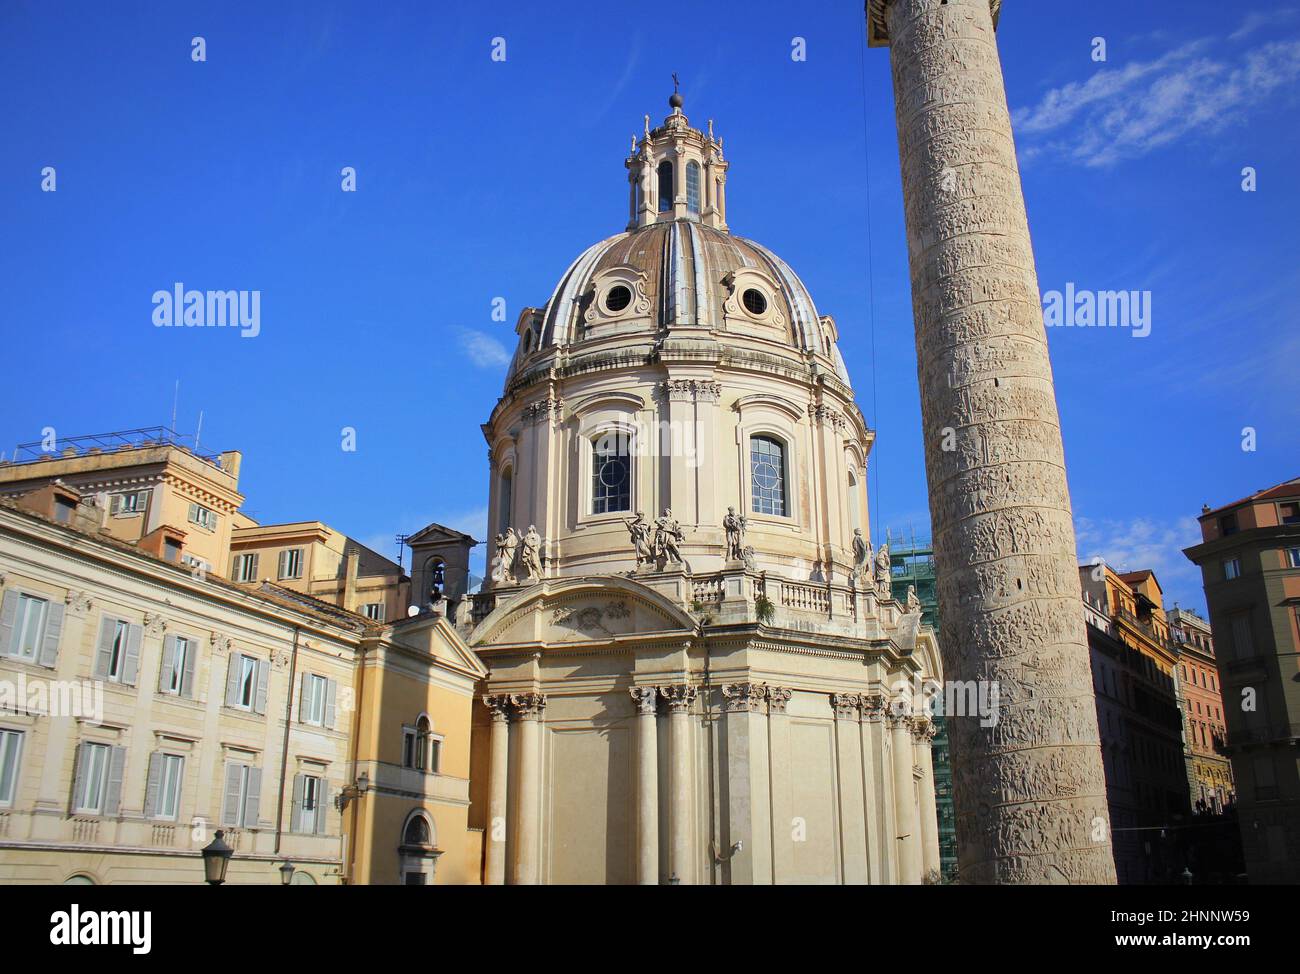 Church of the Most Holy Name of Mary at the Trajan Forum and the Trajan's Column in Rome, Italy. Chiesa del Santissimo Nome di Maria al Foro Traiano. Colonna Traiana Stock Photo